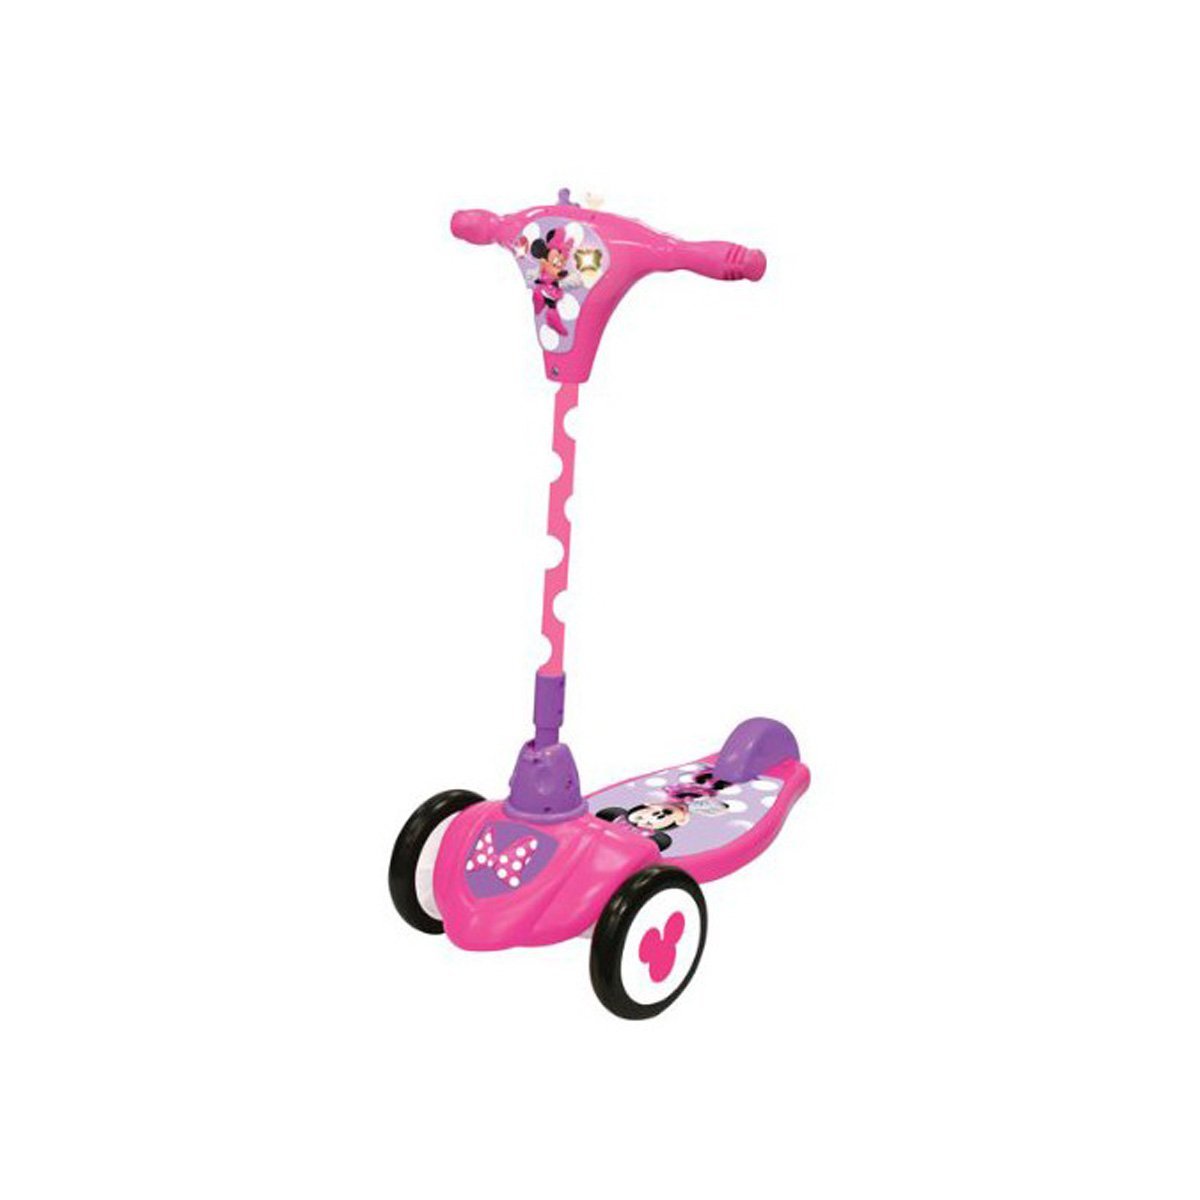 Scooter Minnie Mouse Kiddieland